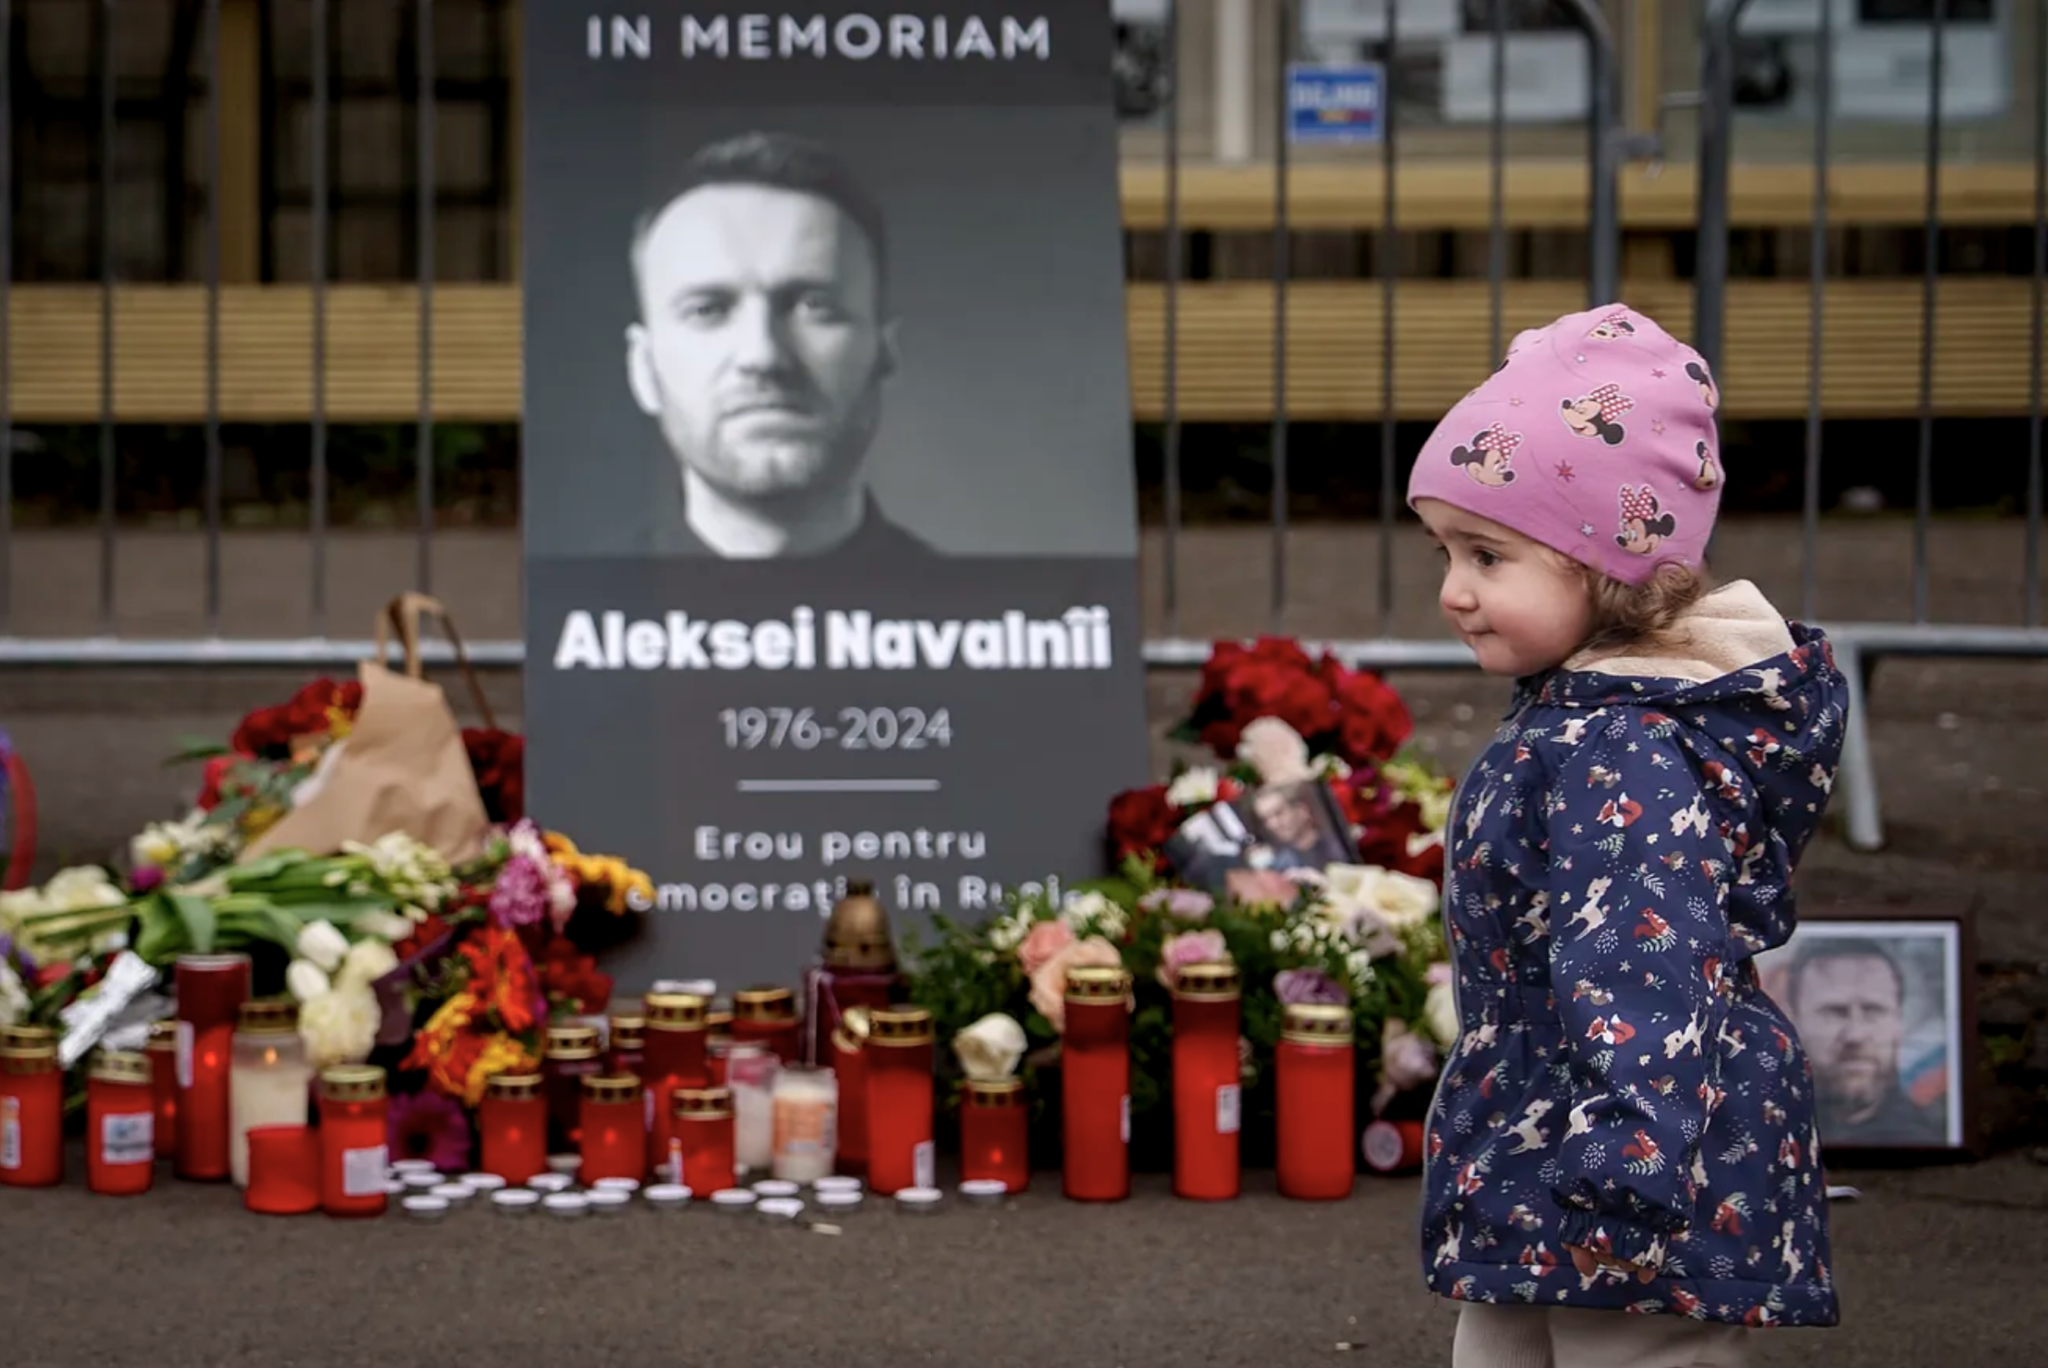 Alexei Navalnys body was bruised, allegedly caused by seizures